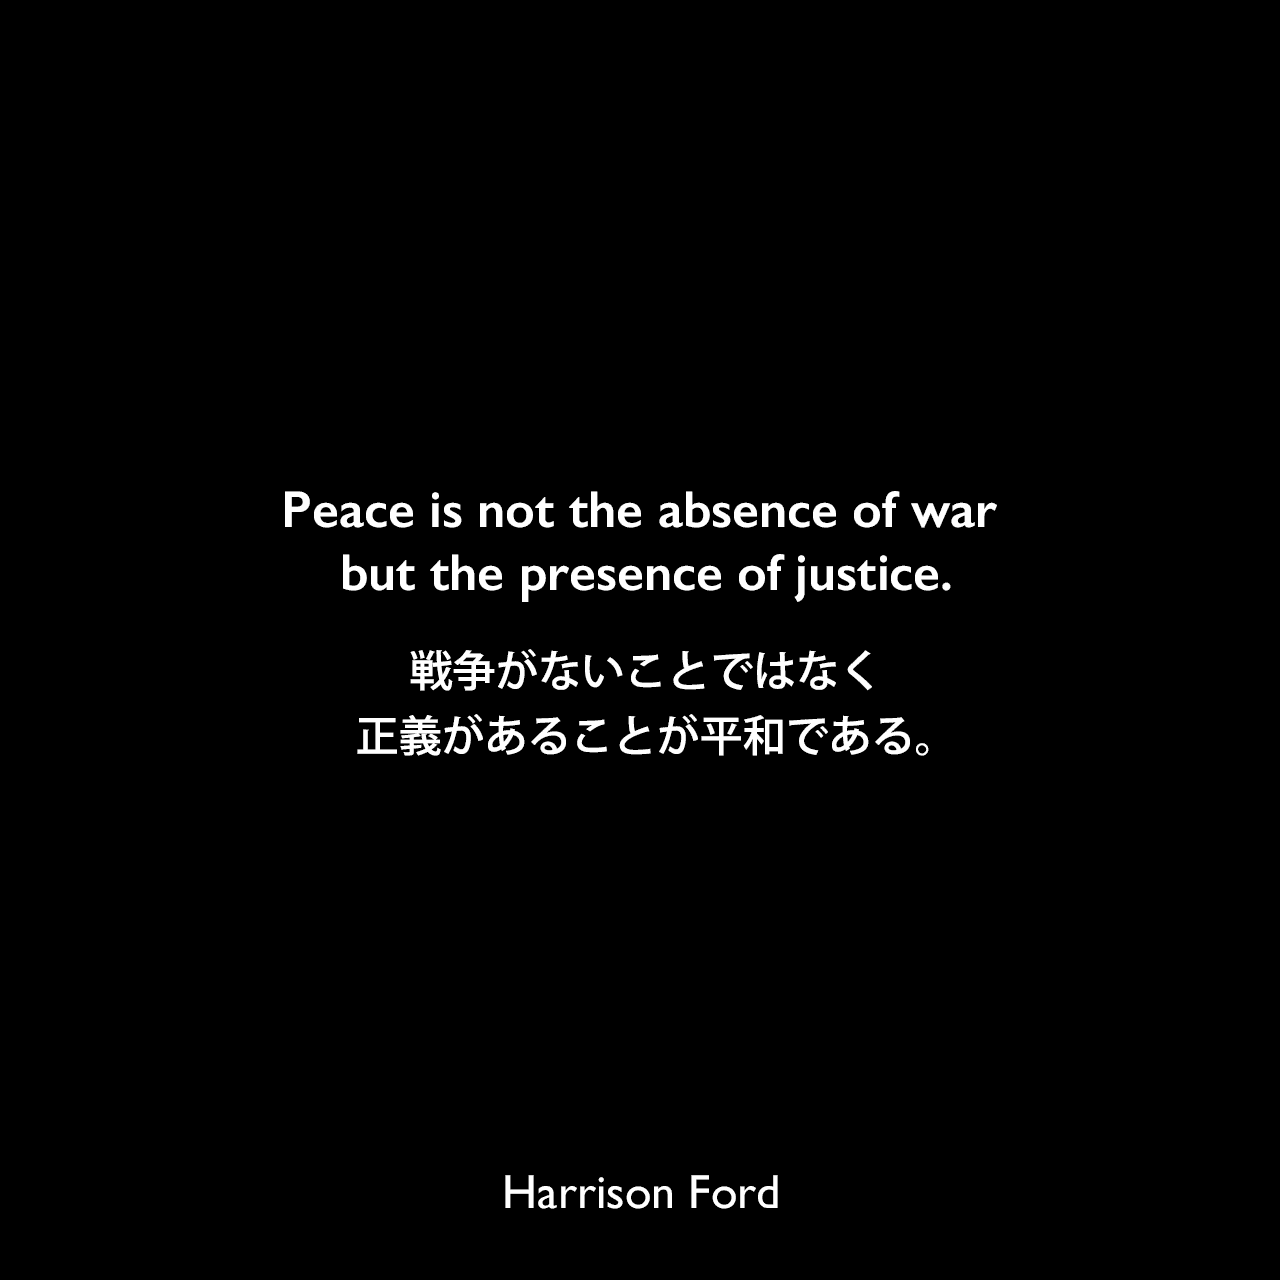 Peace is not the absence of war but the presence of justice.戦争がないことではなく、正義があることが平和である。Harrison Ford